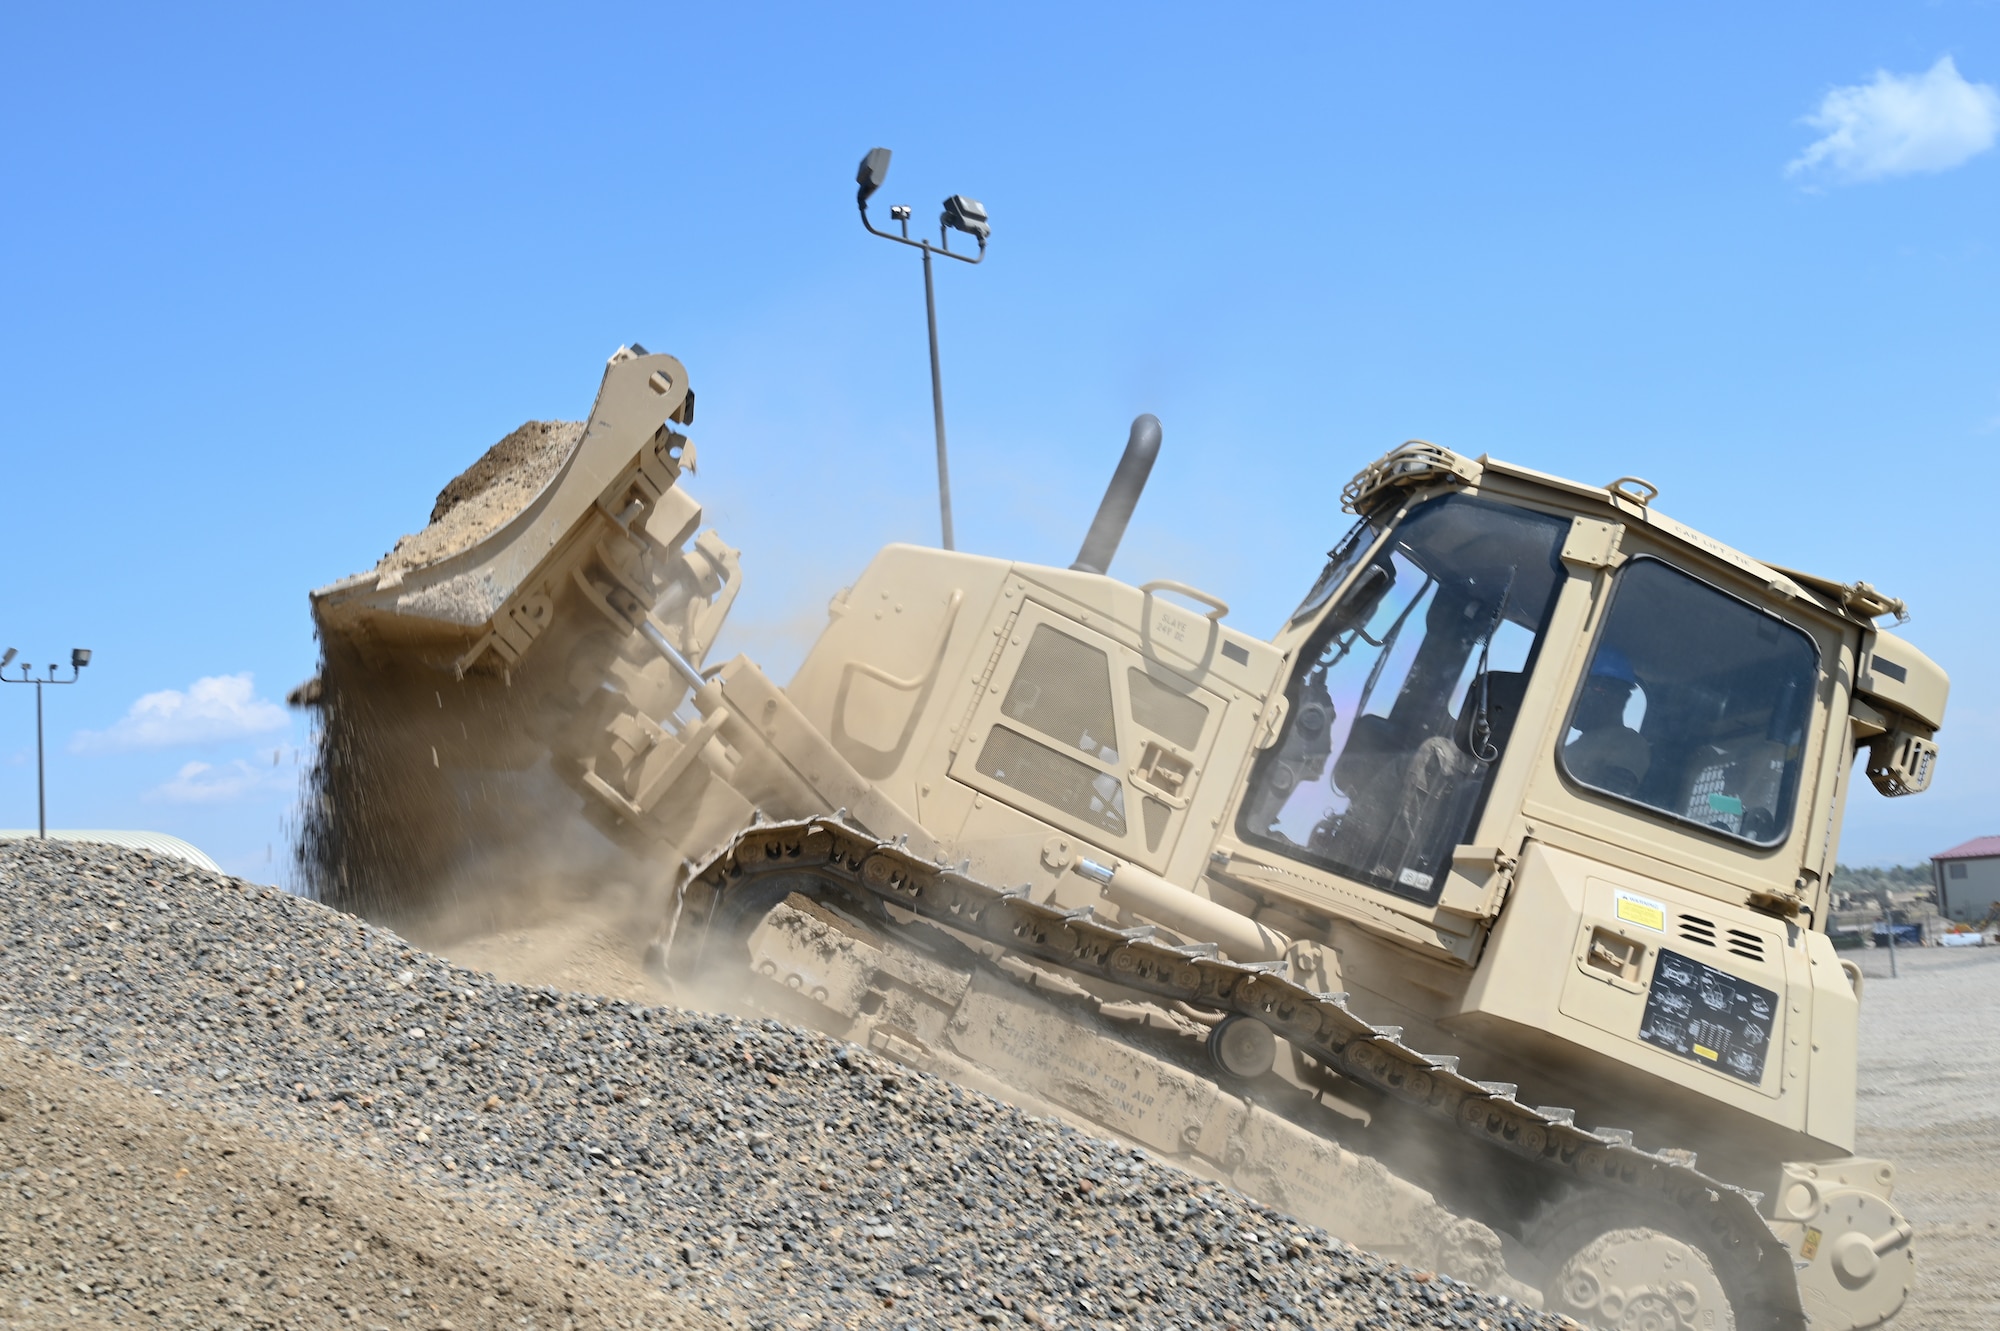 Senior Airman Jonathan Edwards, 131st Civil Engineer Squadron heavy equipment operator, operates a bulldozer to consolidate stockpile material for a building under construction at Fort William Henry Harrison, Montana, July 25, 2023. The project provides an opportunity for 131st Airmen to develop skills and gain experience in their military jobs. (U.S. Air National Guard photo by Airman 1st Class Phoenix Lietch)